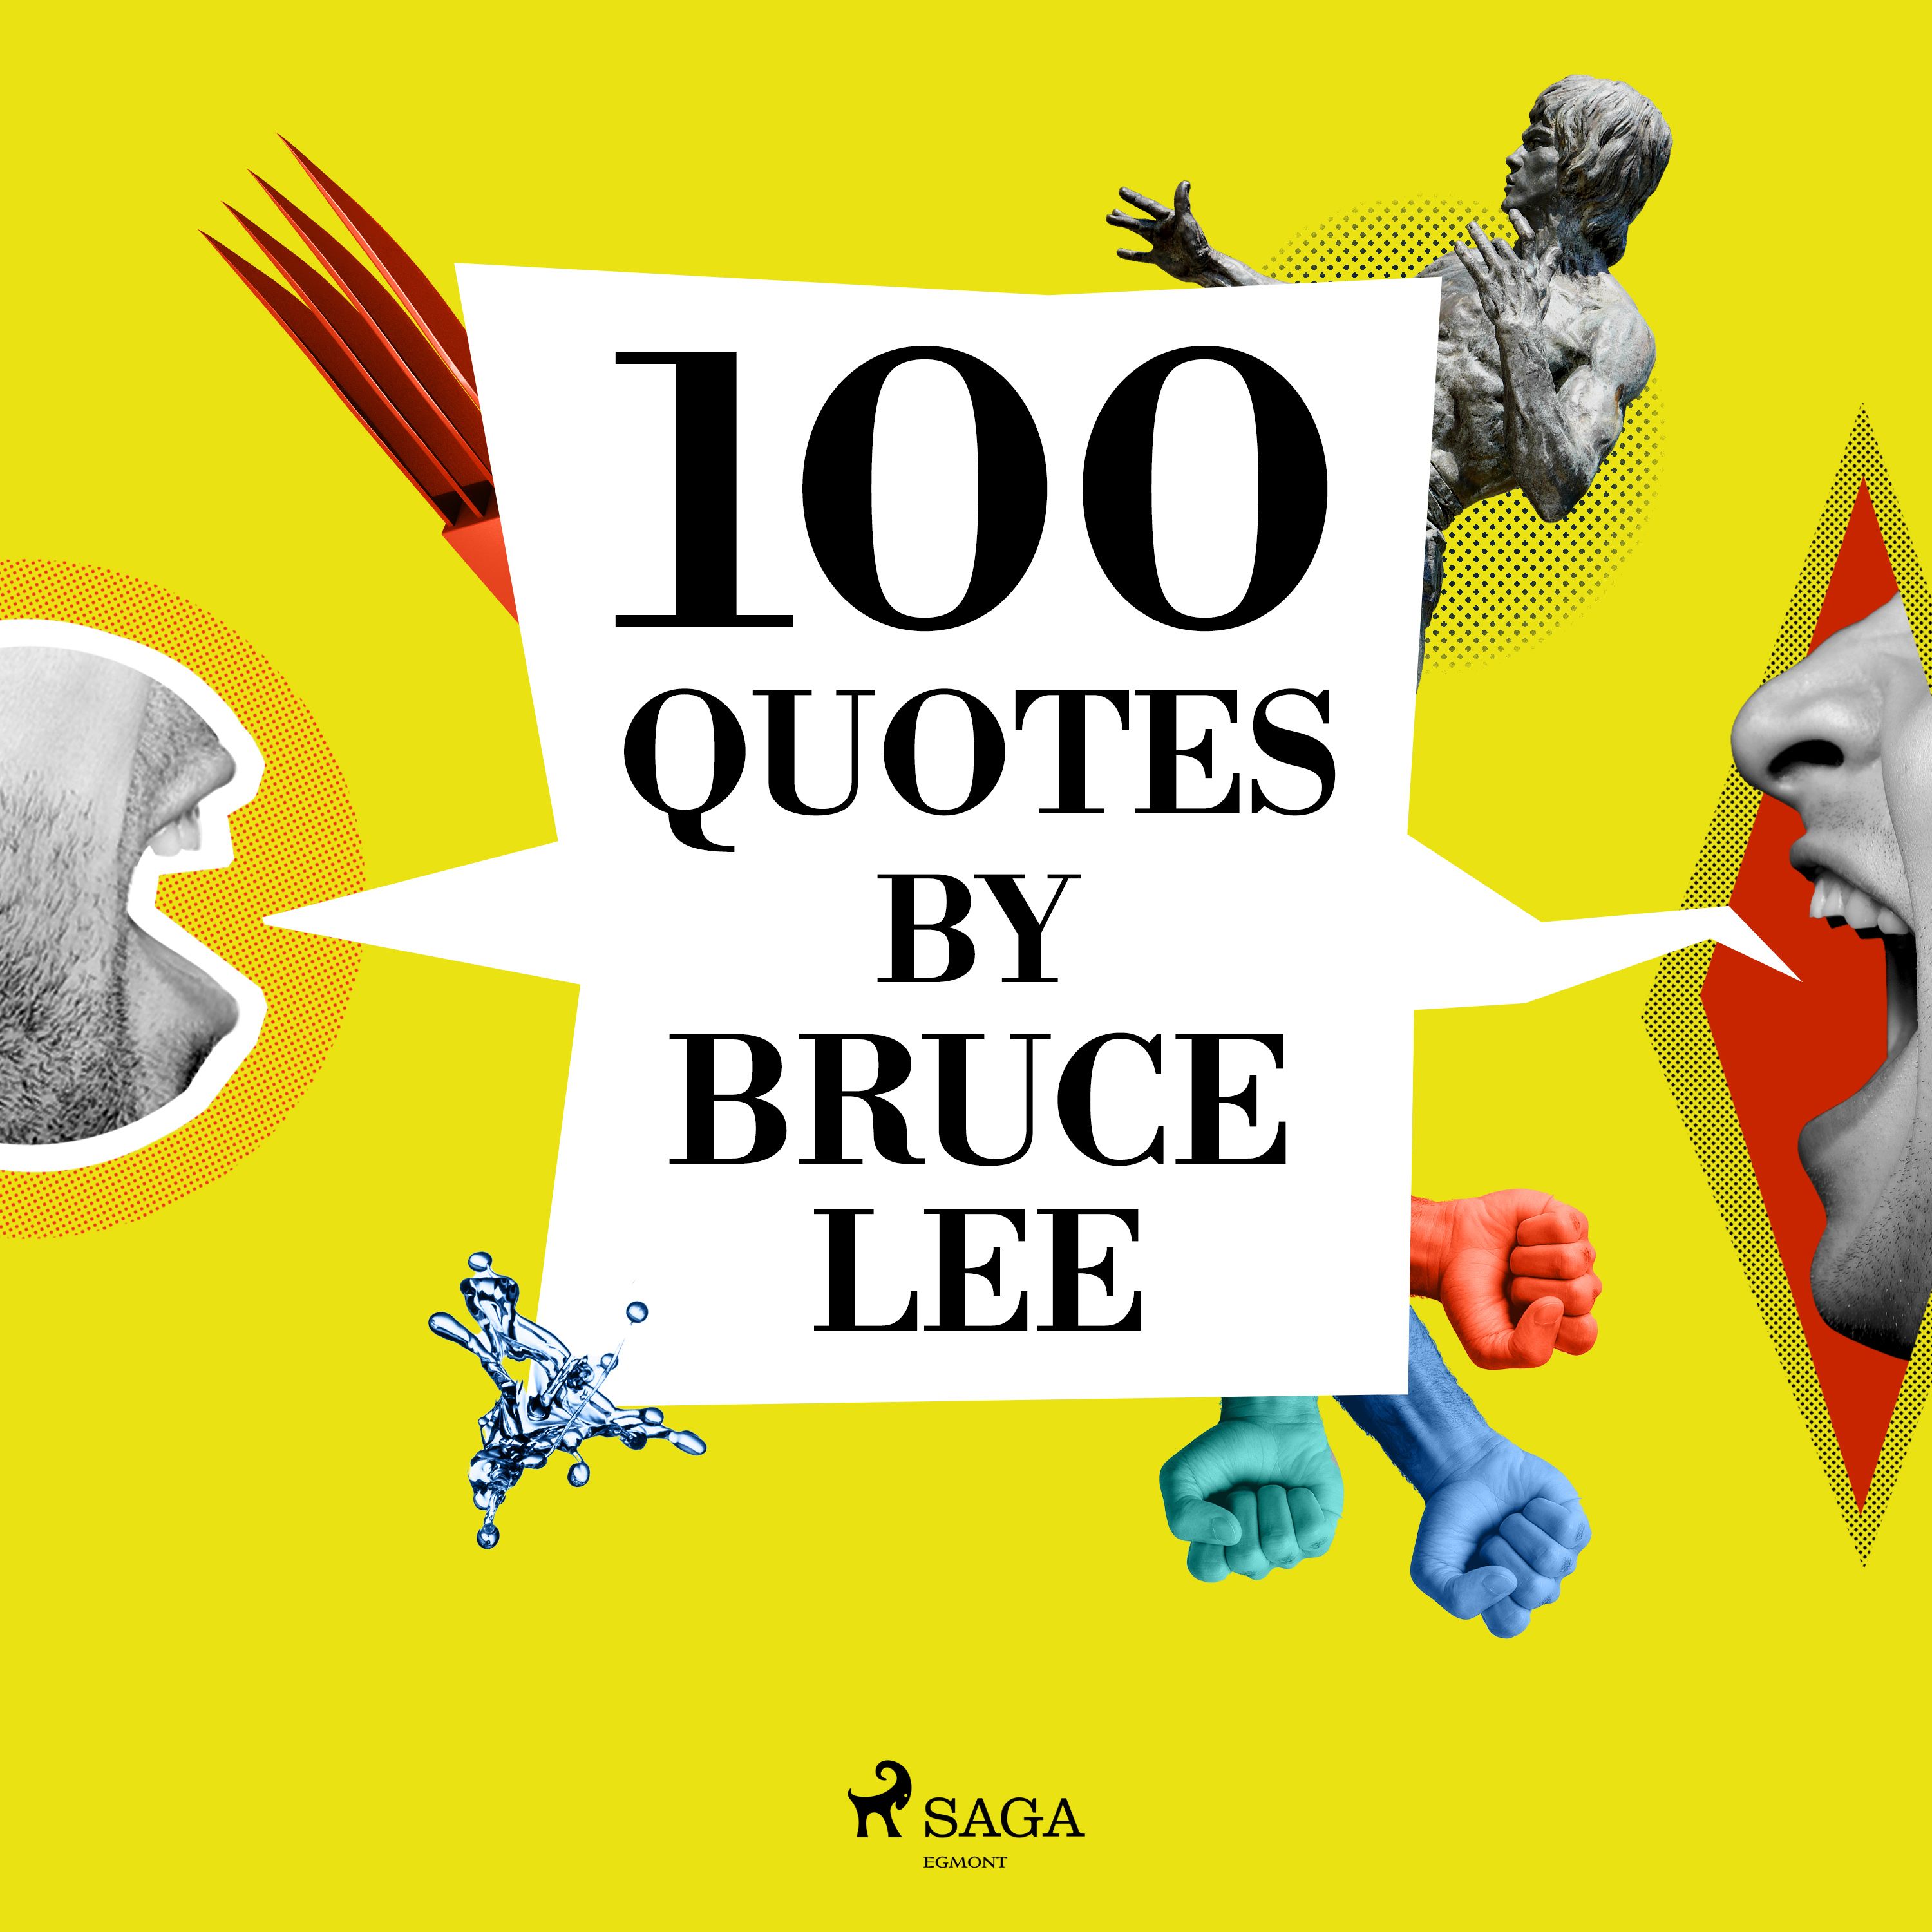 100 Quotes by Bruce Lee, audiobook by Bruce Lee